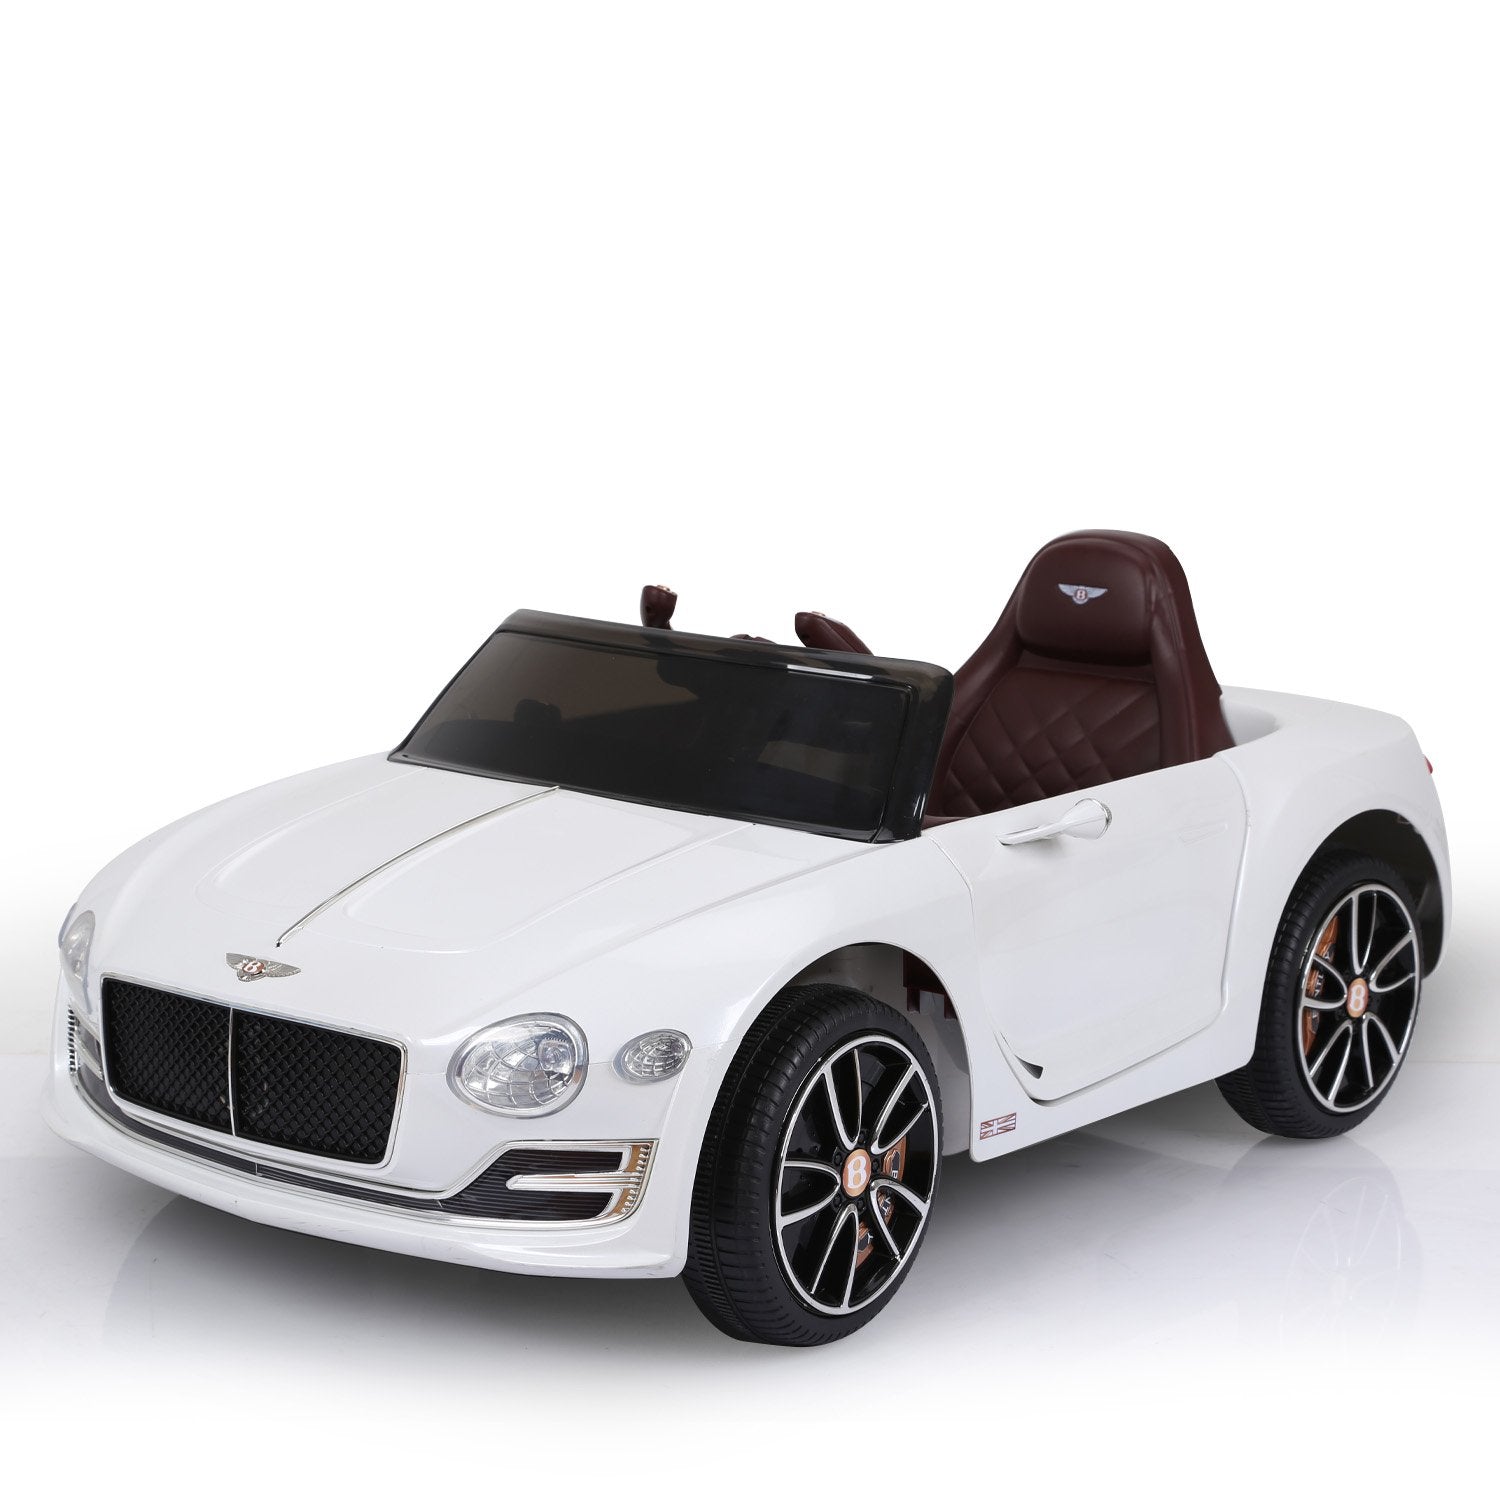 Kahuna Bentley Exp 12 Speed 6E Licensed Kids Ride-On Electric Car with Remote Control (White)